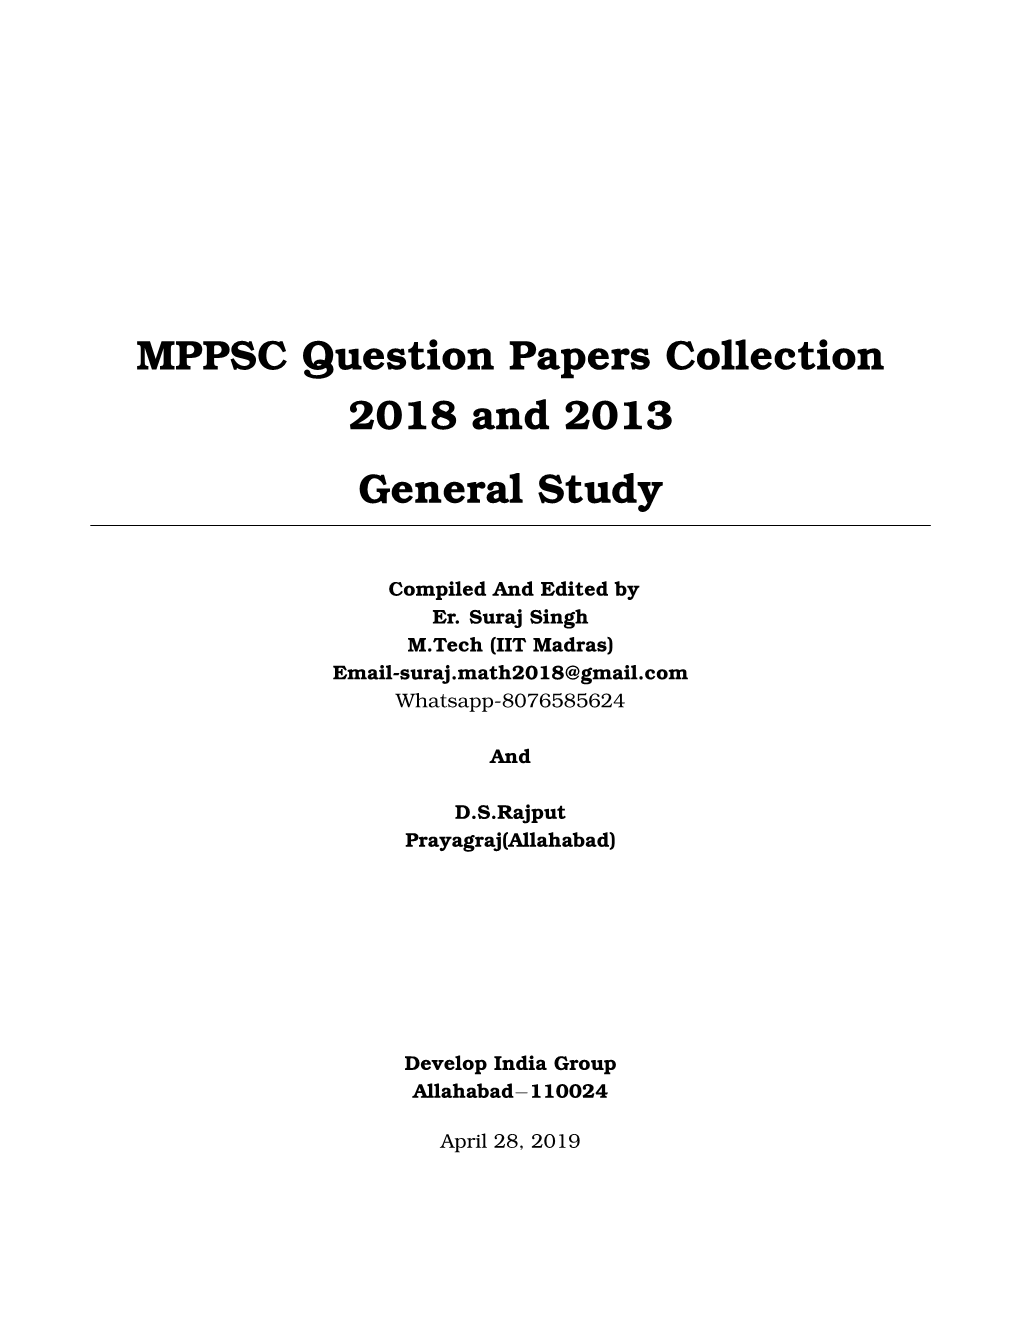 MPPSC Question Papers Collection 2018 and 2013 General Study